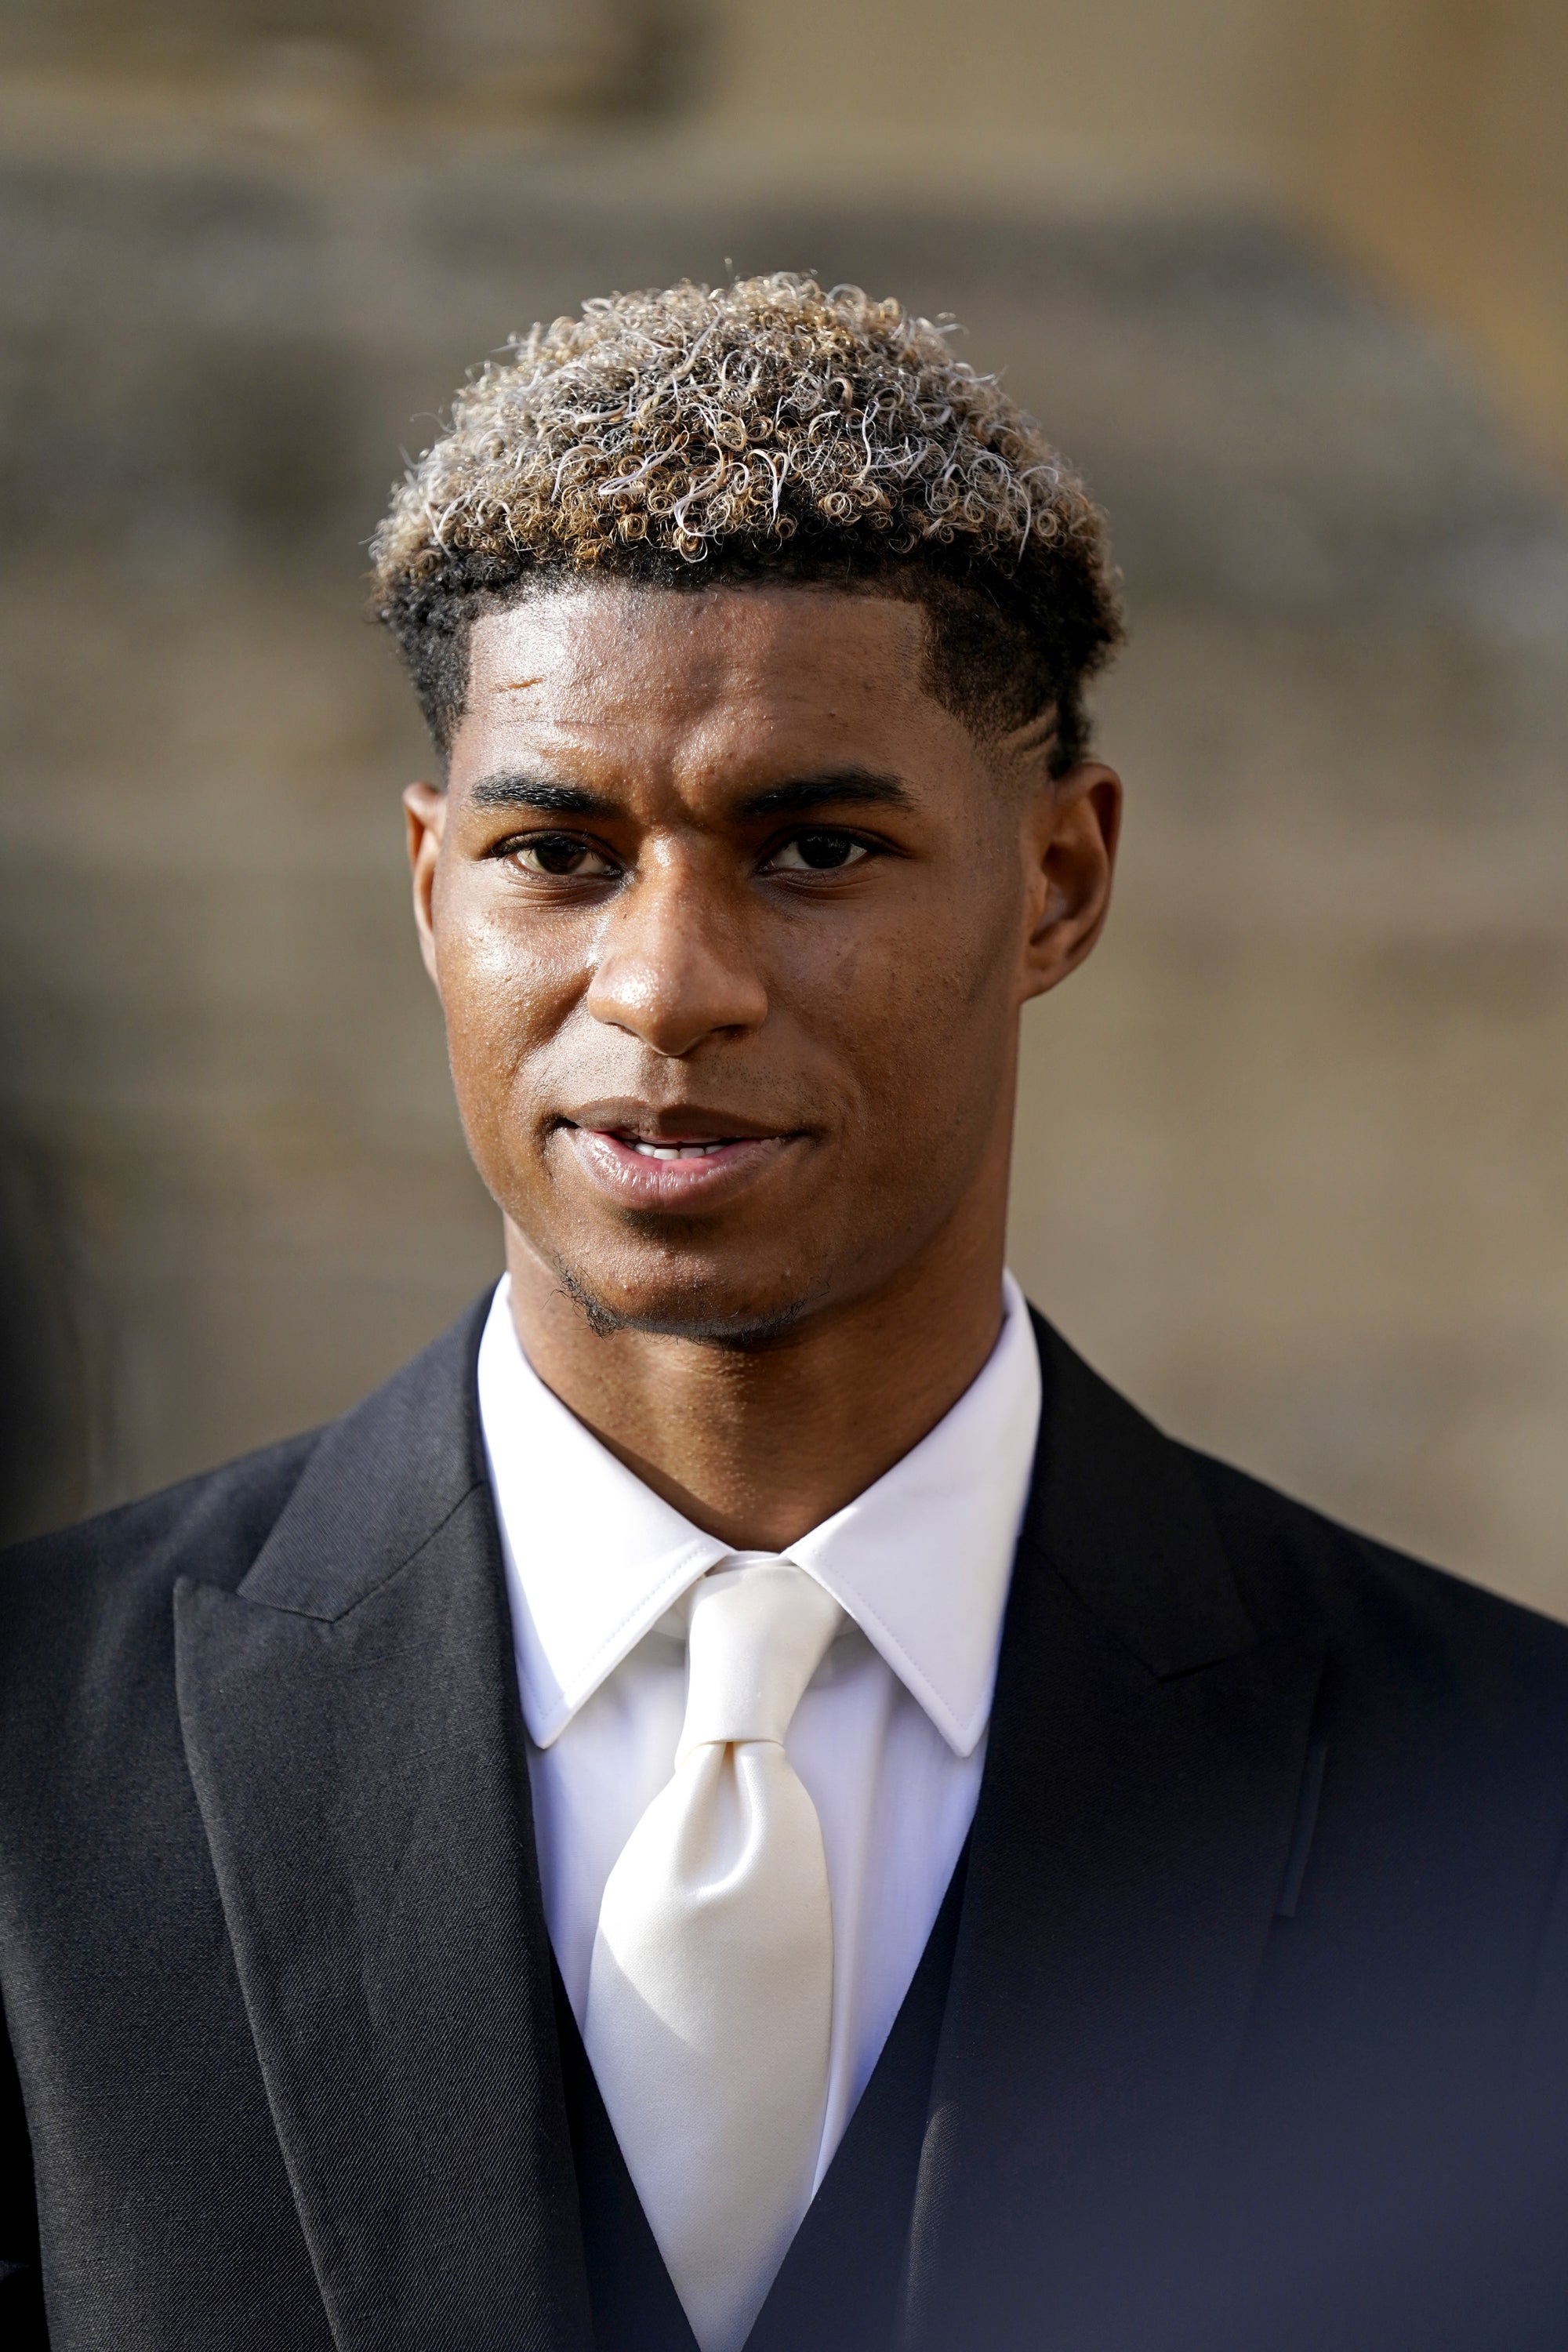 Children can be fearful of talking about money, according to Marcus Rashford, who is working with NatWest on an initiative to support young people to develop a positive relationship with cash (Andrew Matthews/PA)